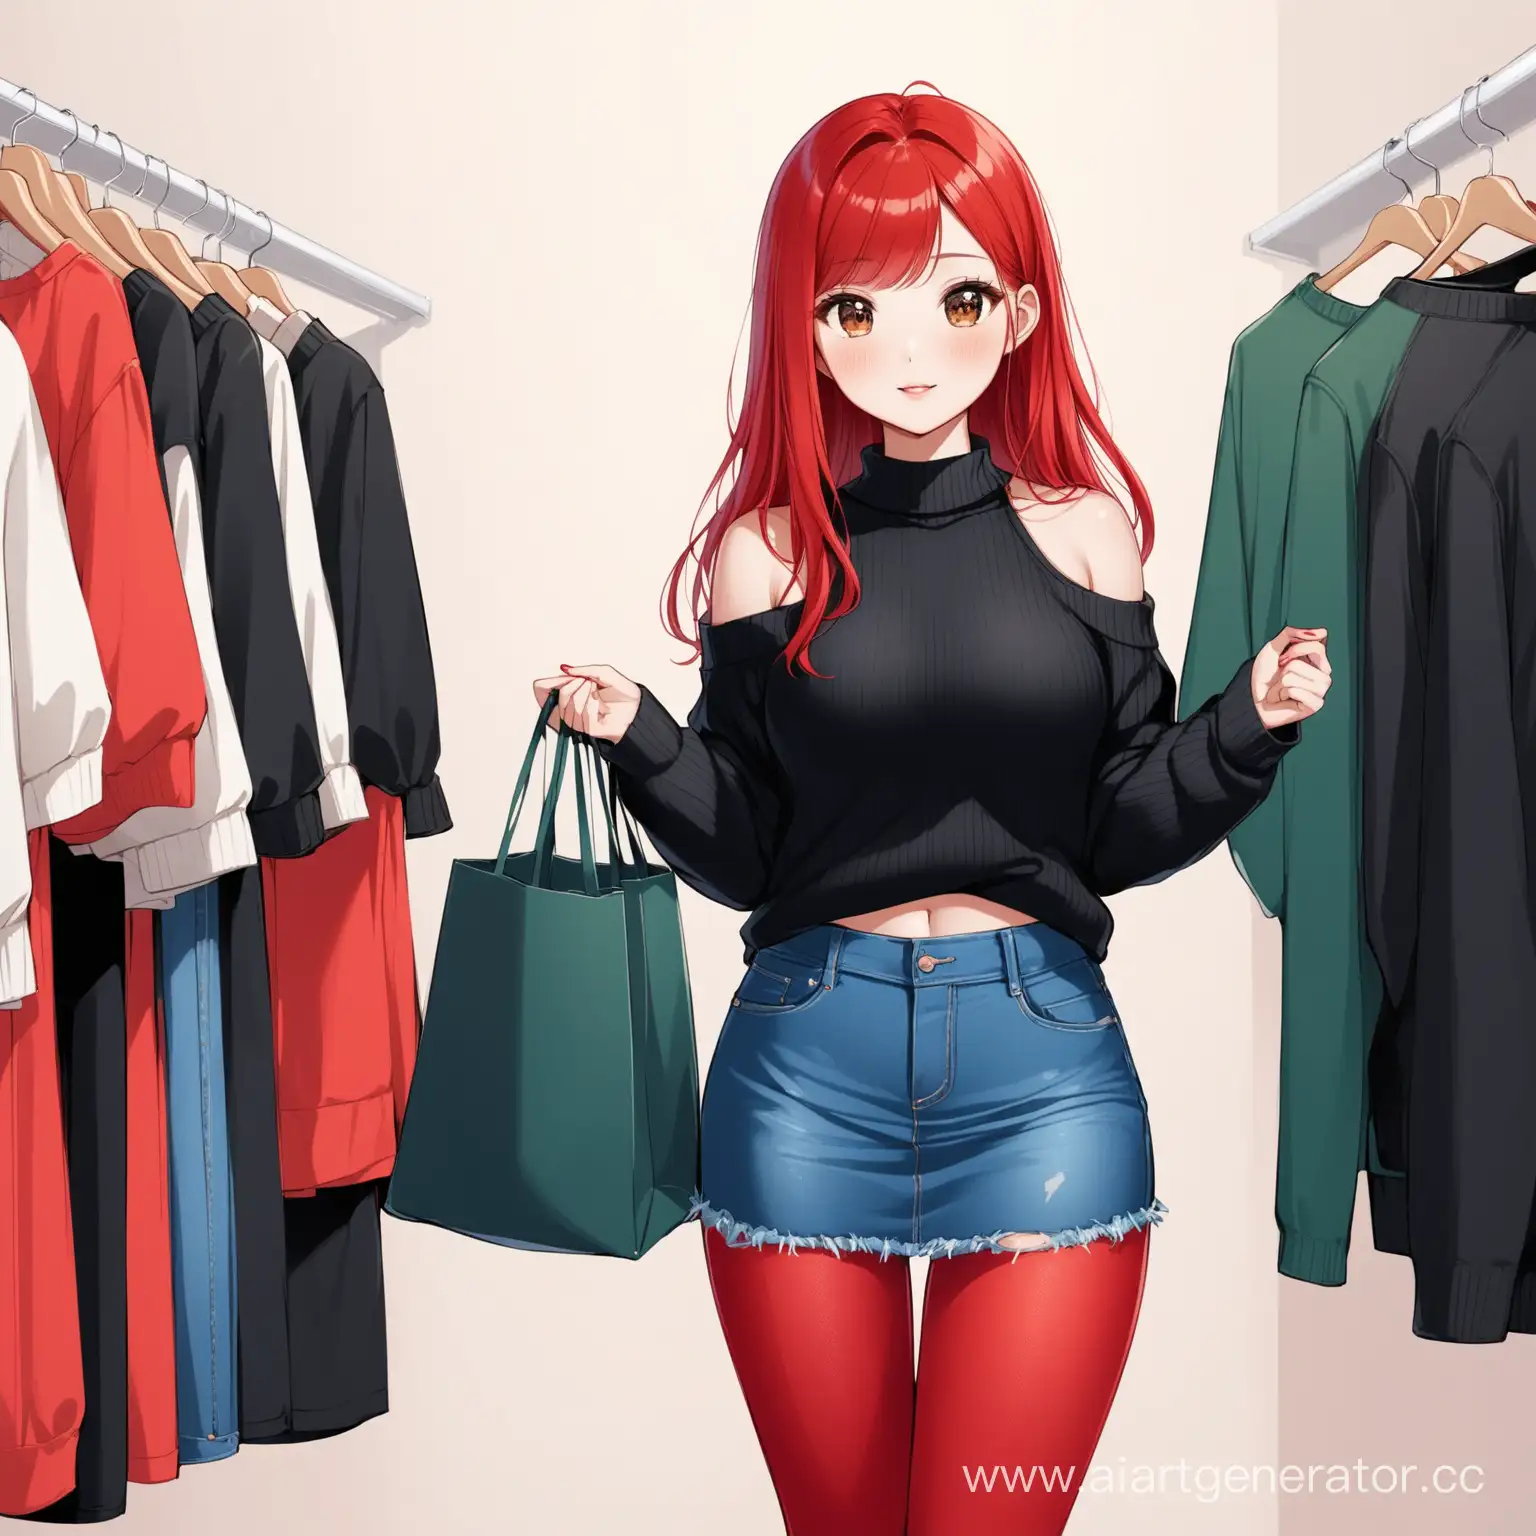 Stylish-RedHaired-Asian-Woman-with-New-Fashion-Purchases